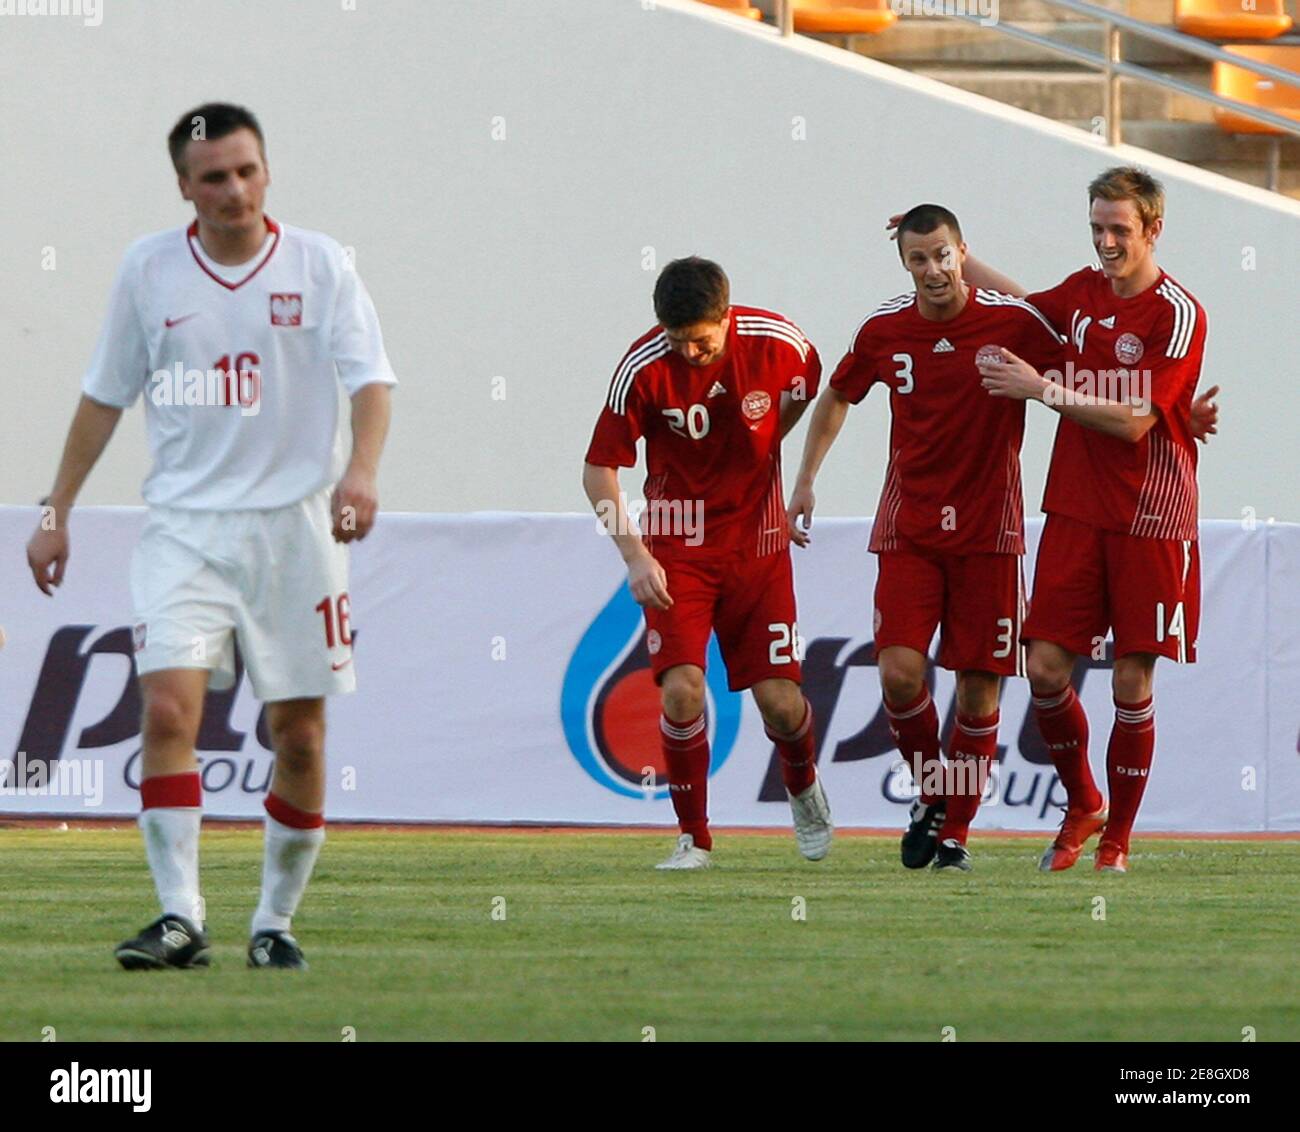 Denmark's Jesper Bech (2nd R) celebrates with teammates Soren Risks (R) and Martin Ornskov after he scored during their Thailand King's Cup football tournament against Poland at His Majesty The 80th Birthday Anniversary stadium in Nakhon Ratchasima province northeast of Bangkok, January 17, 2010. REUTERS/Chaiwat Subprasom  (THAILAND - Tags: SPORT SOCCER) Stock Photo